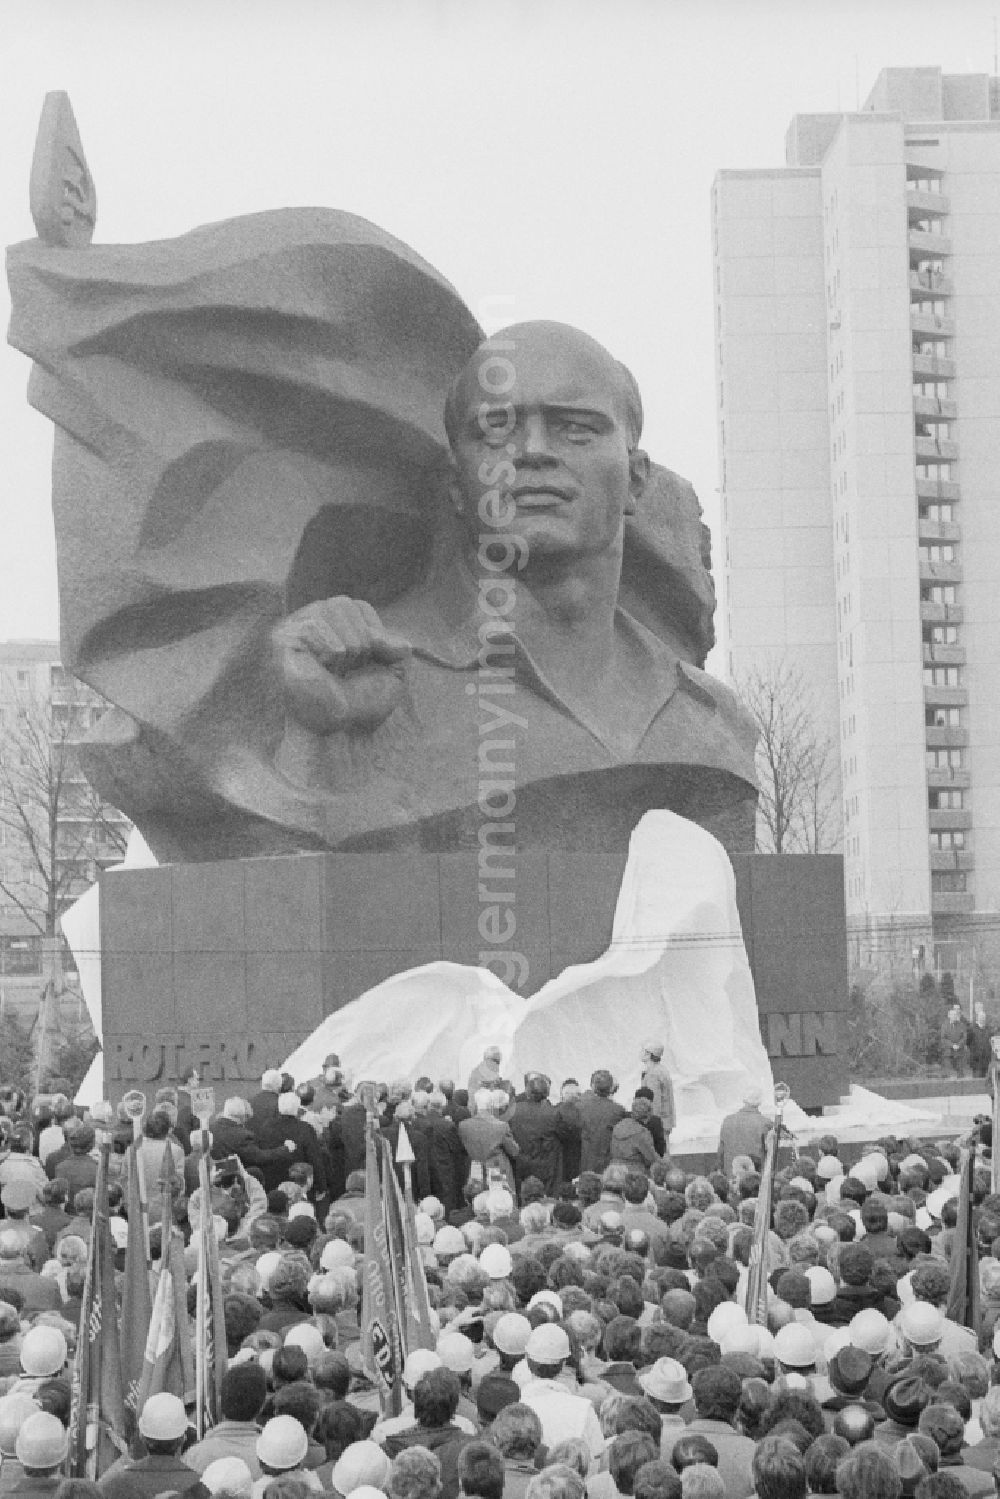 GDR photo archive: Berlin - Inauguration by Ernst-Thaelmann Memorial in Ernst-Thaelmann-Park in Berlin, the former capital of the GDR, the German Democratic Republic